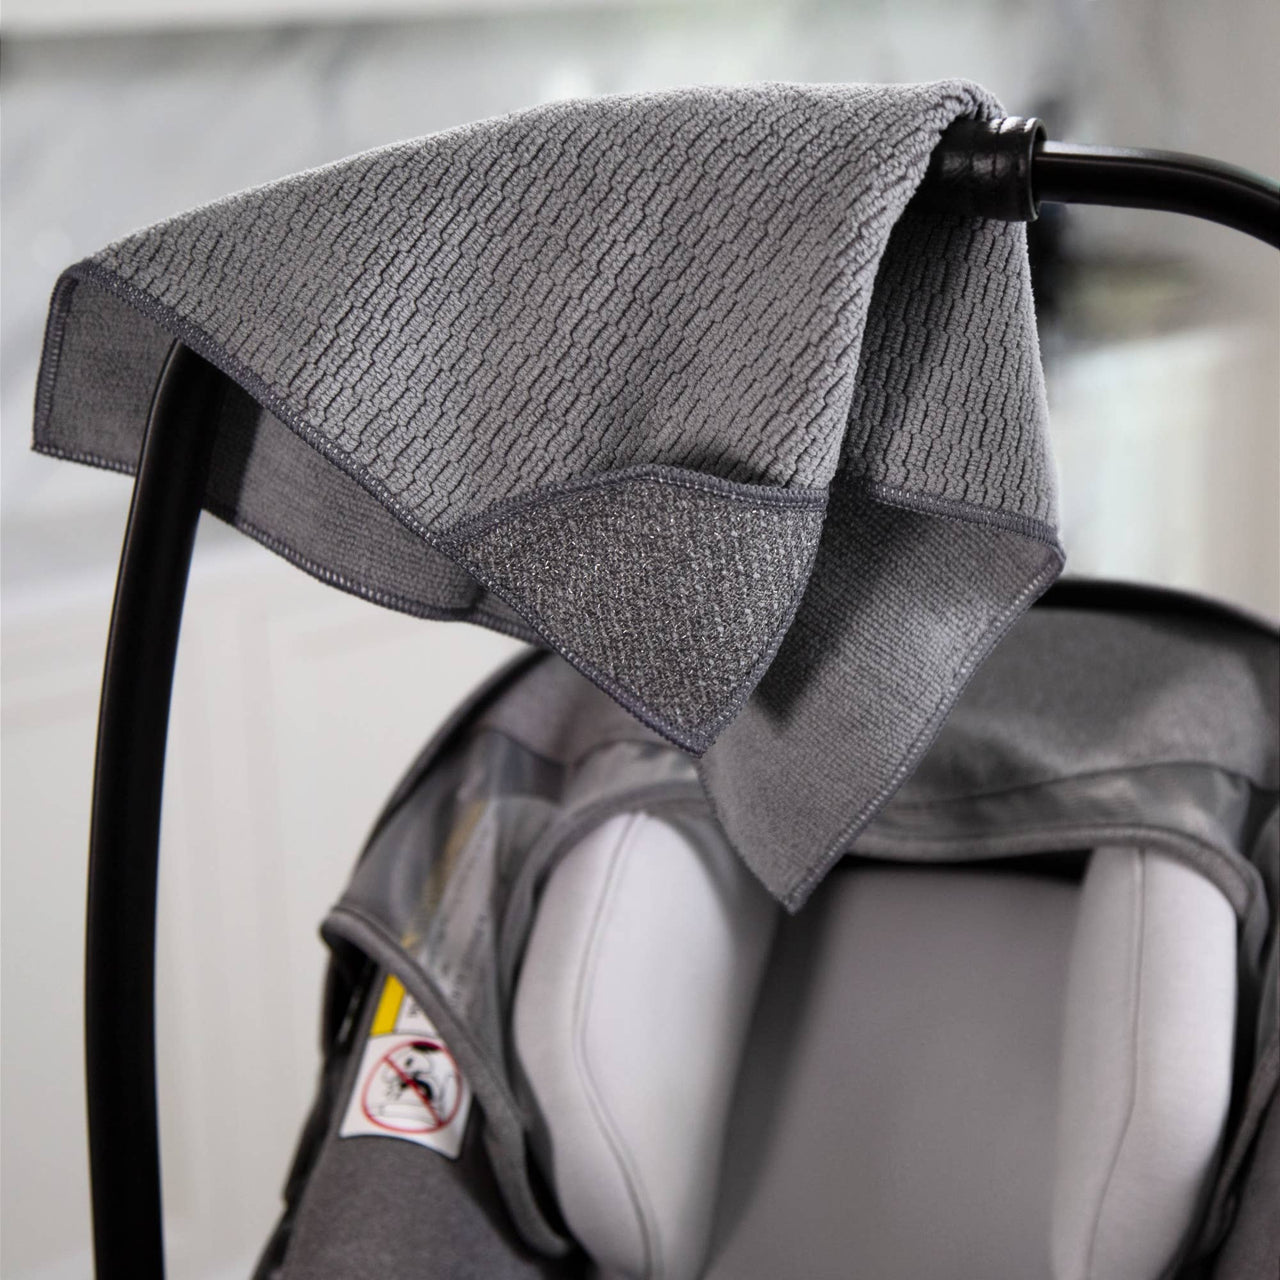 Stroller & Car Seat Cleaning Cloth E-Cloth